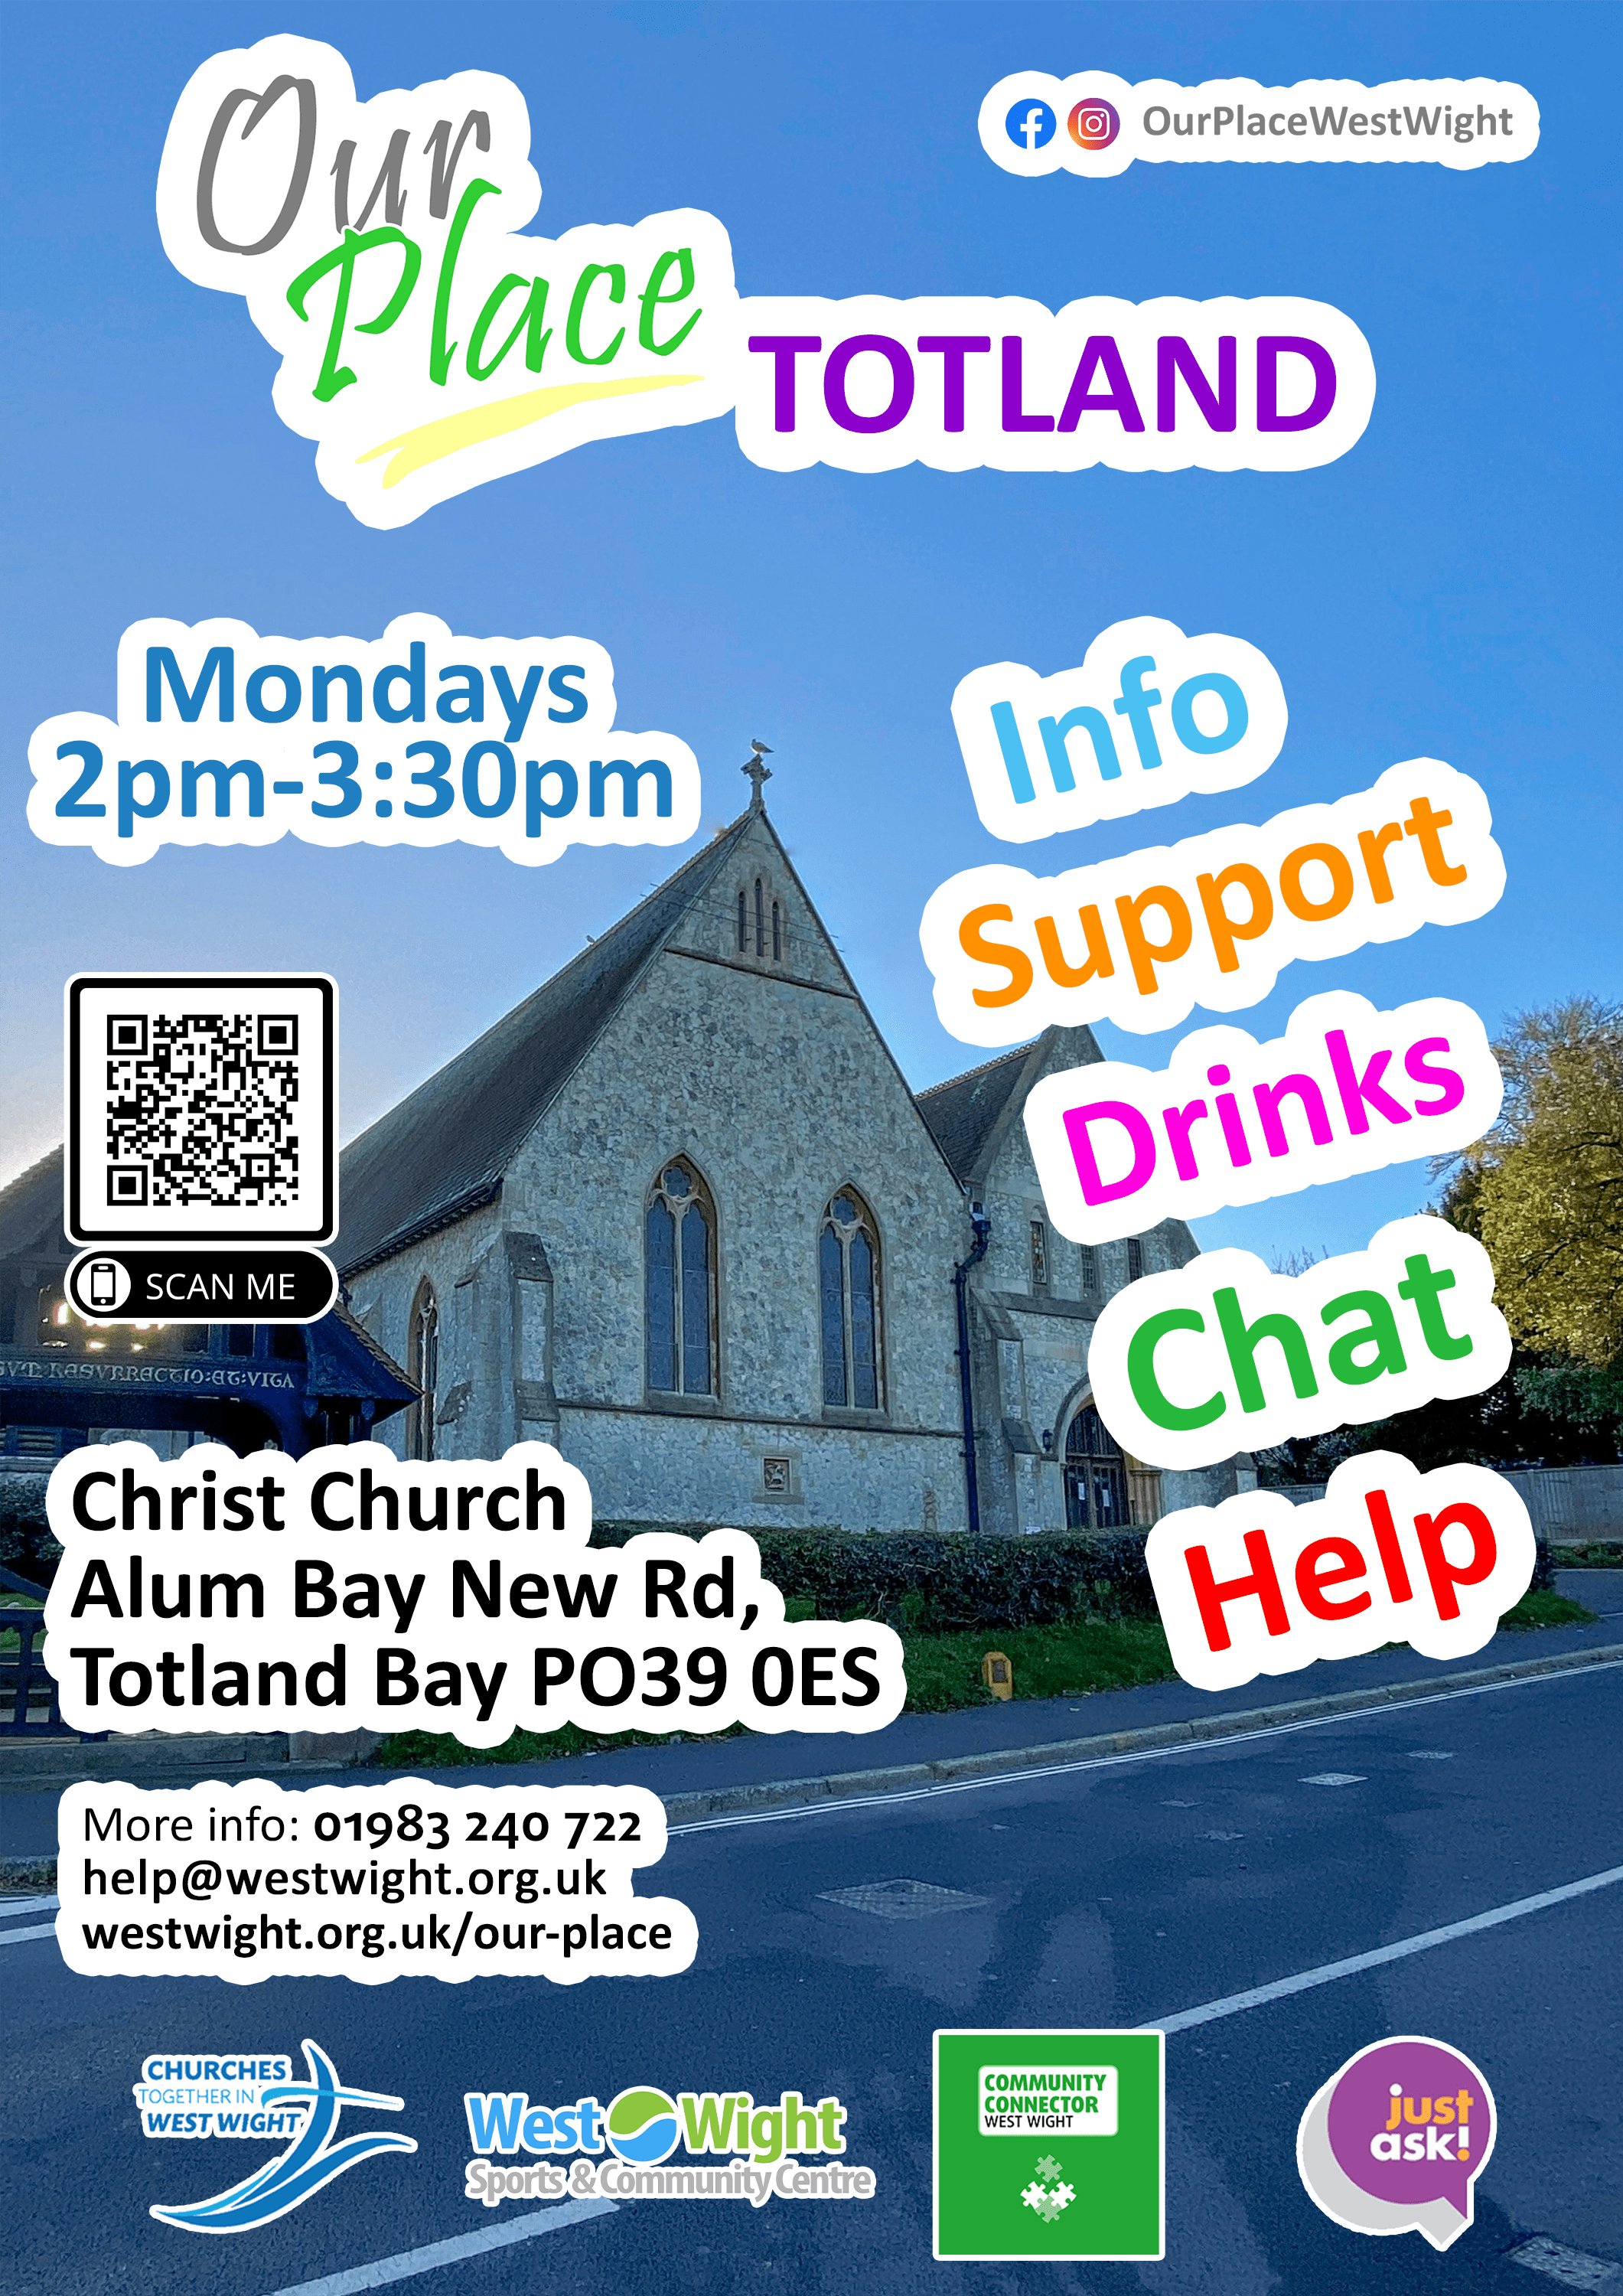 Our Place Totland poster showing front of church and detail of sessions. Get information, support, drinks, chat and help onsite.